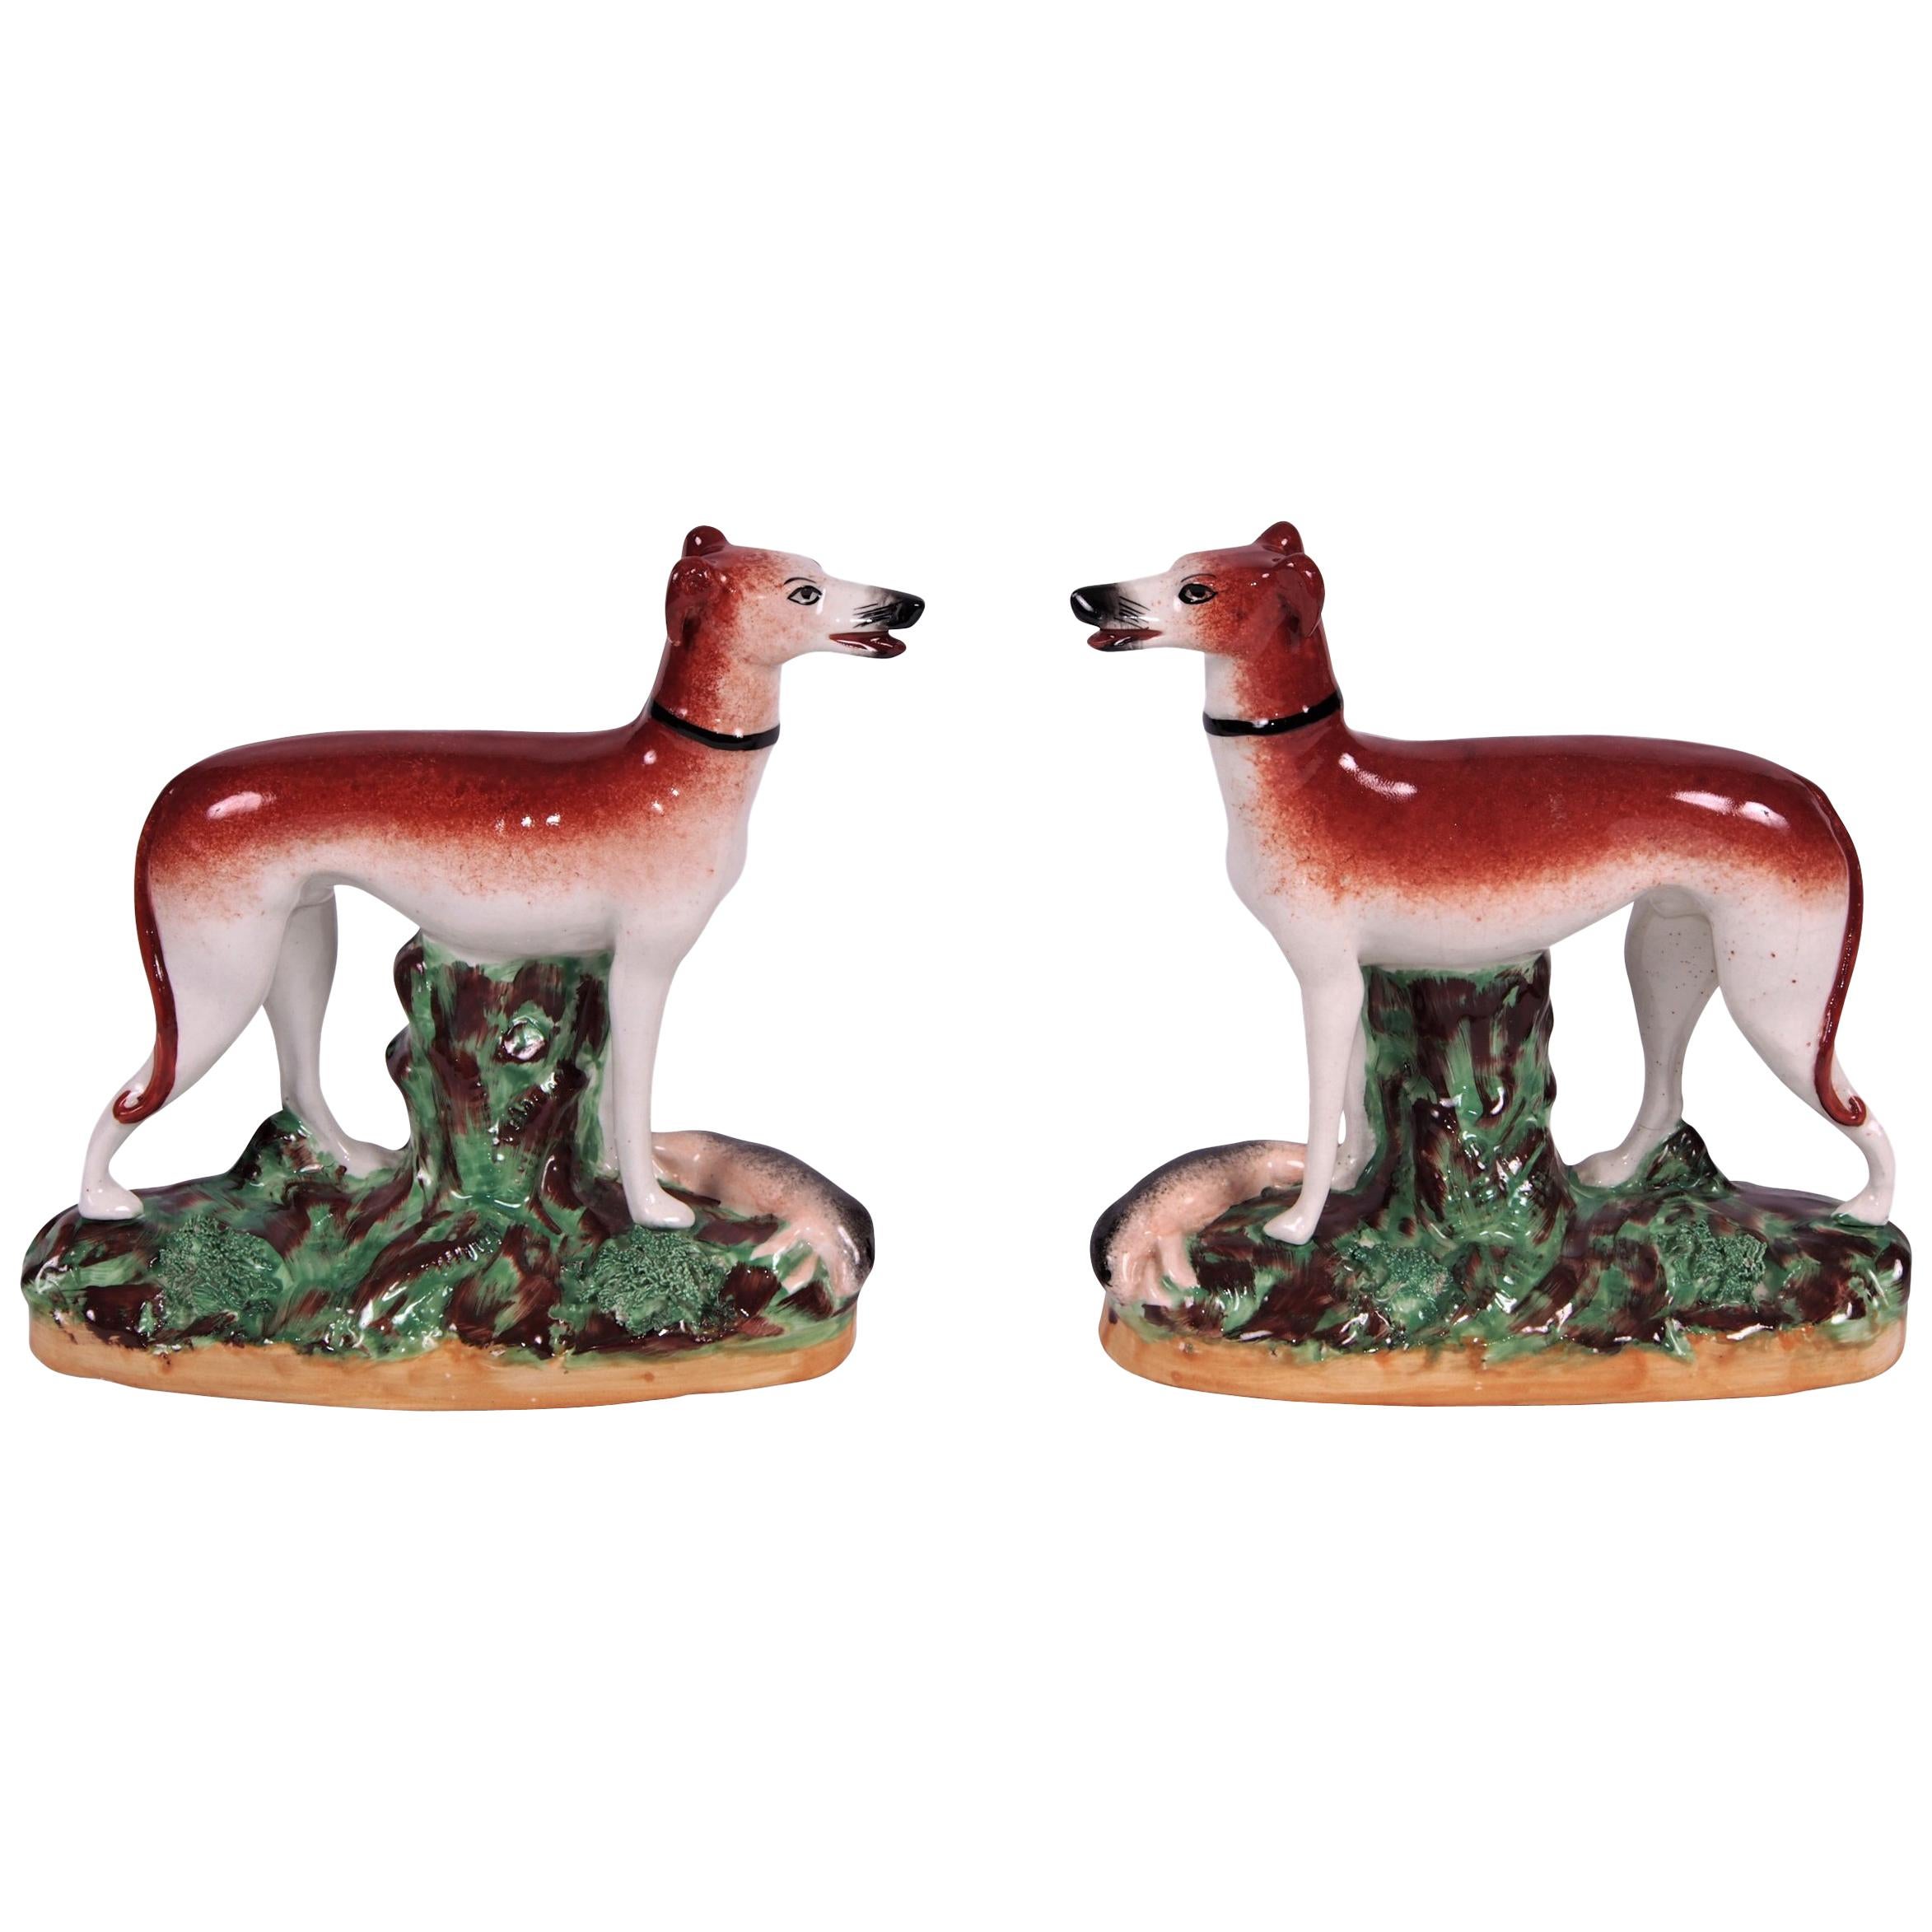 Pair of Vintage English Staffordshire Dogs